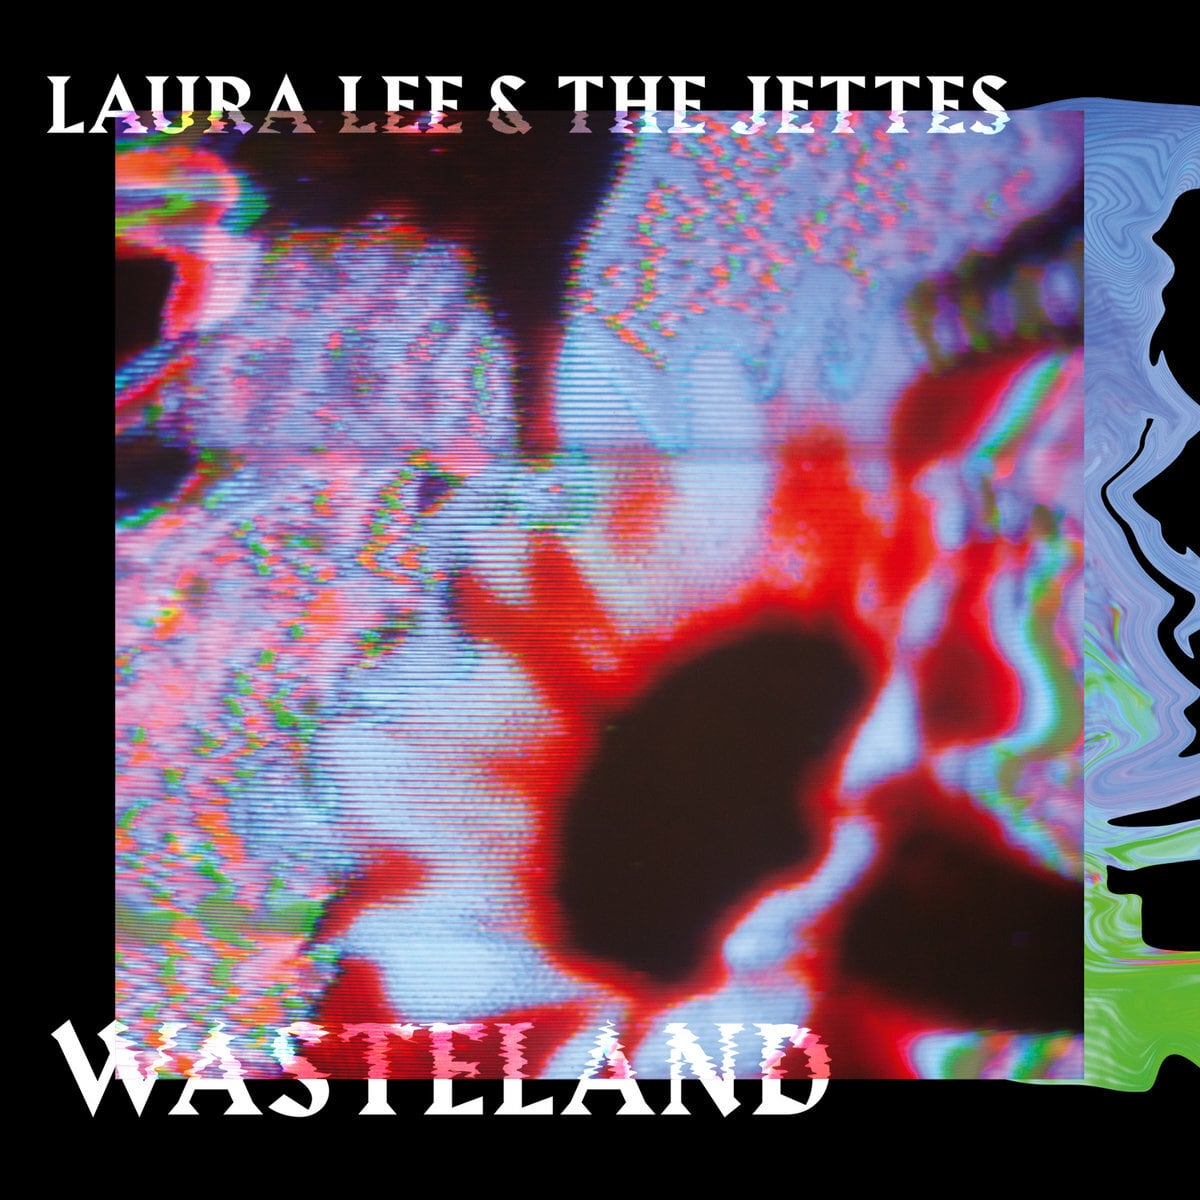 Laura Lee & the Jettes / Wasteland（LP）